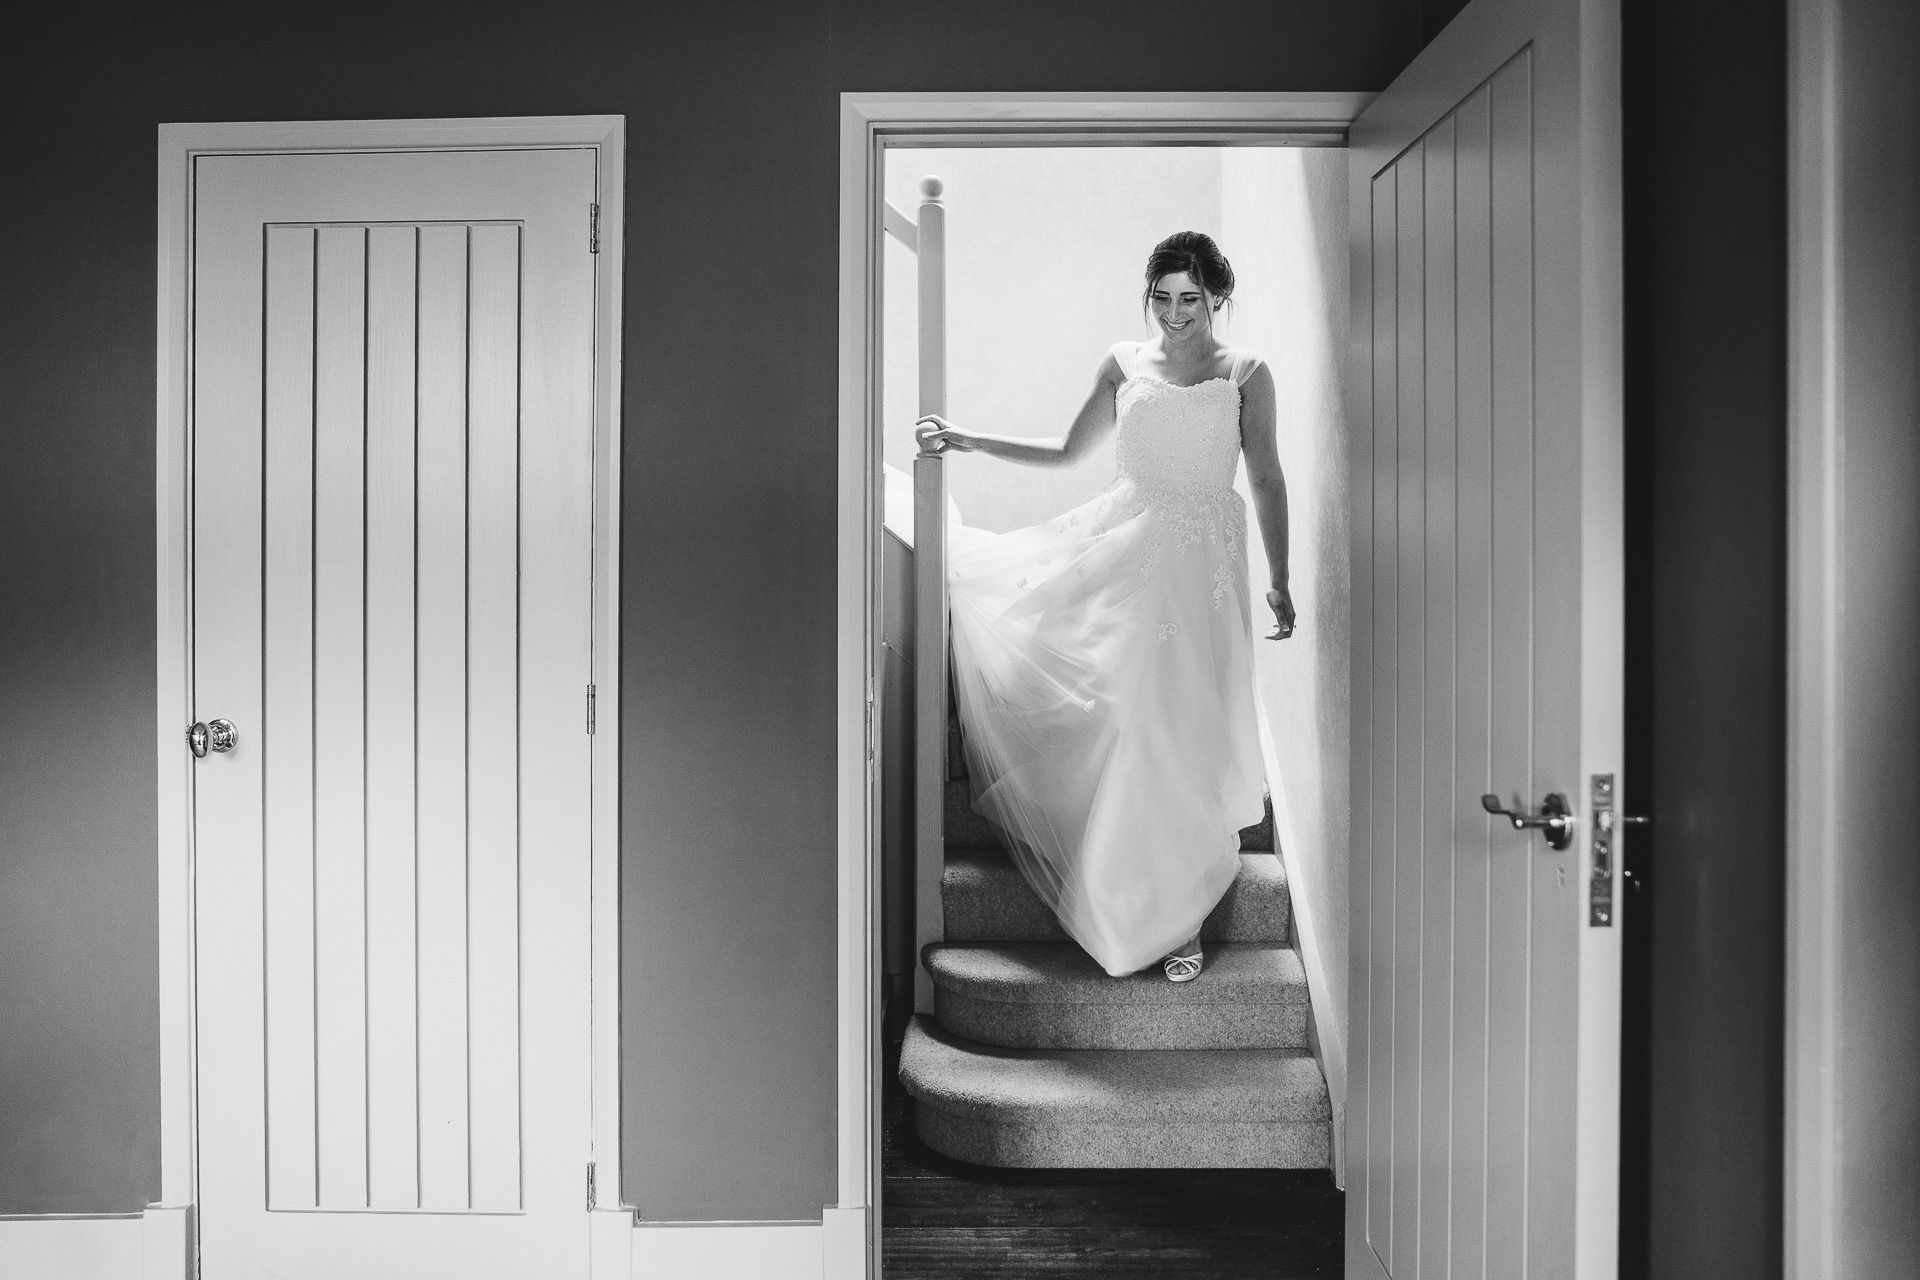 Bride coming down a staircase in wedding dress